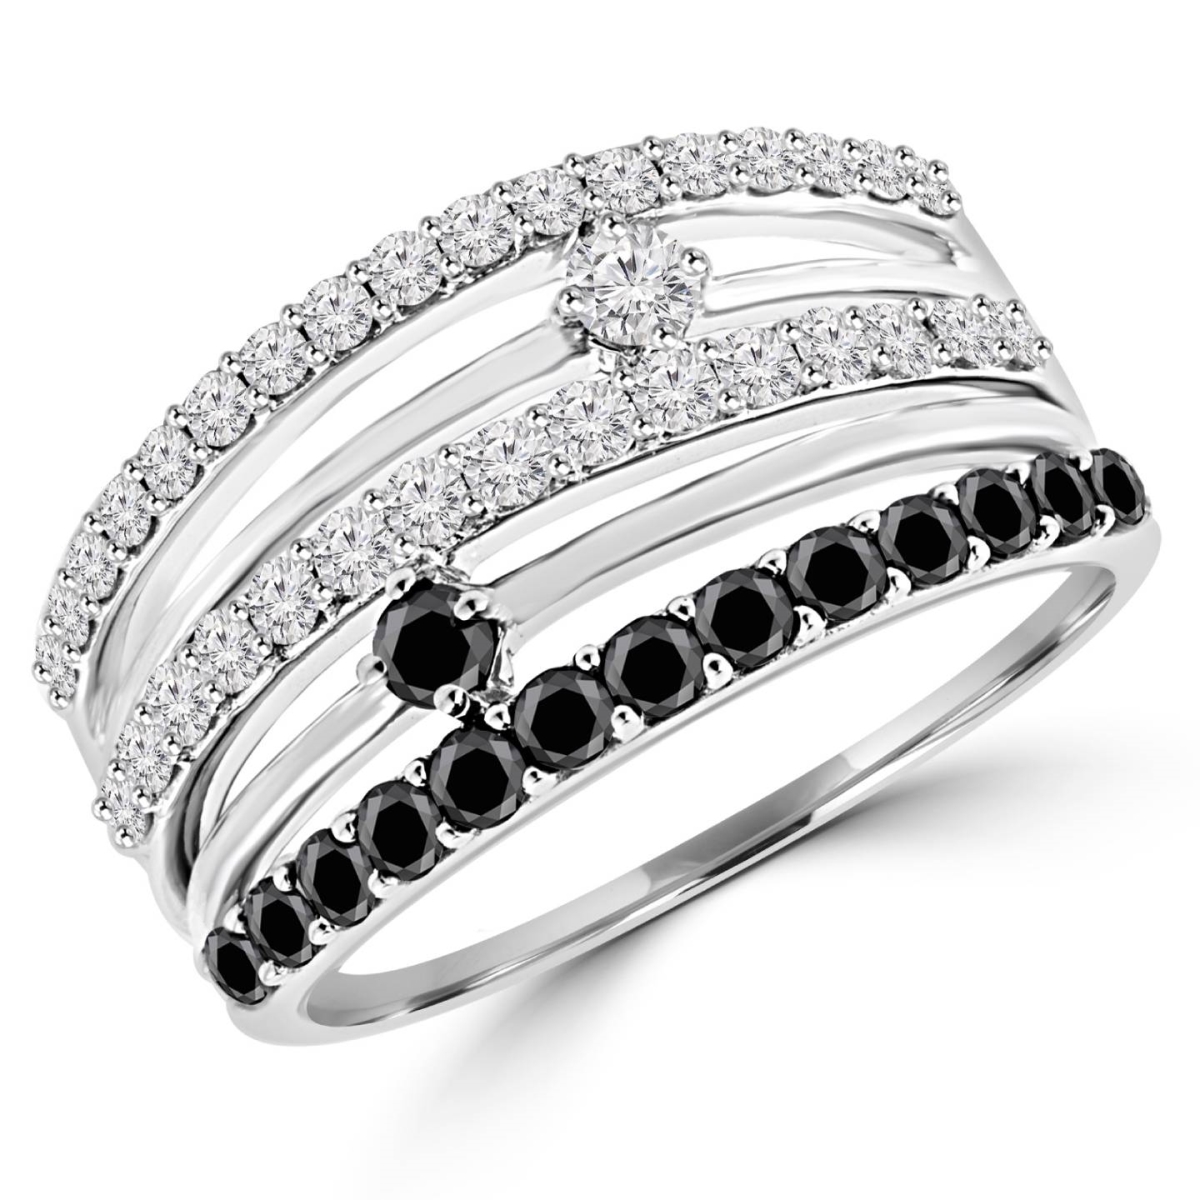 Picture of Majesty Diamonds MDR140107-3.5 0.8 CTW 5-Row Black & White Diamond Fashion Cocktail Ring in 14K White Gold - Size 3.5